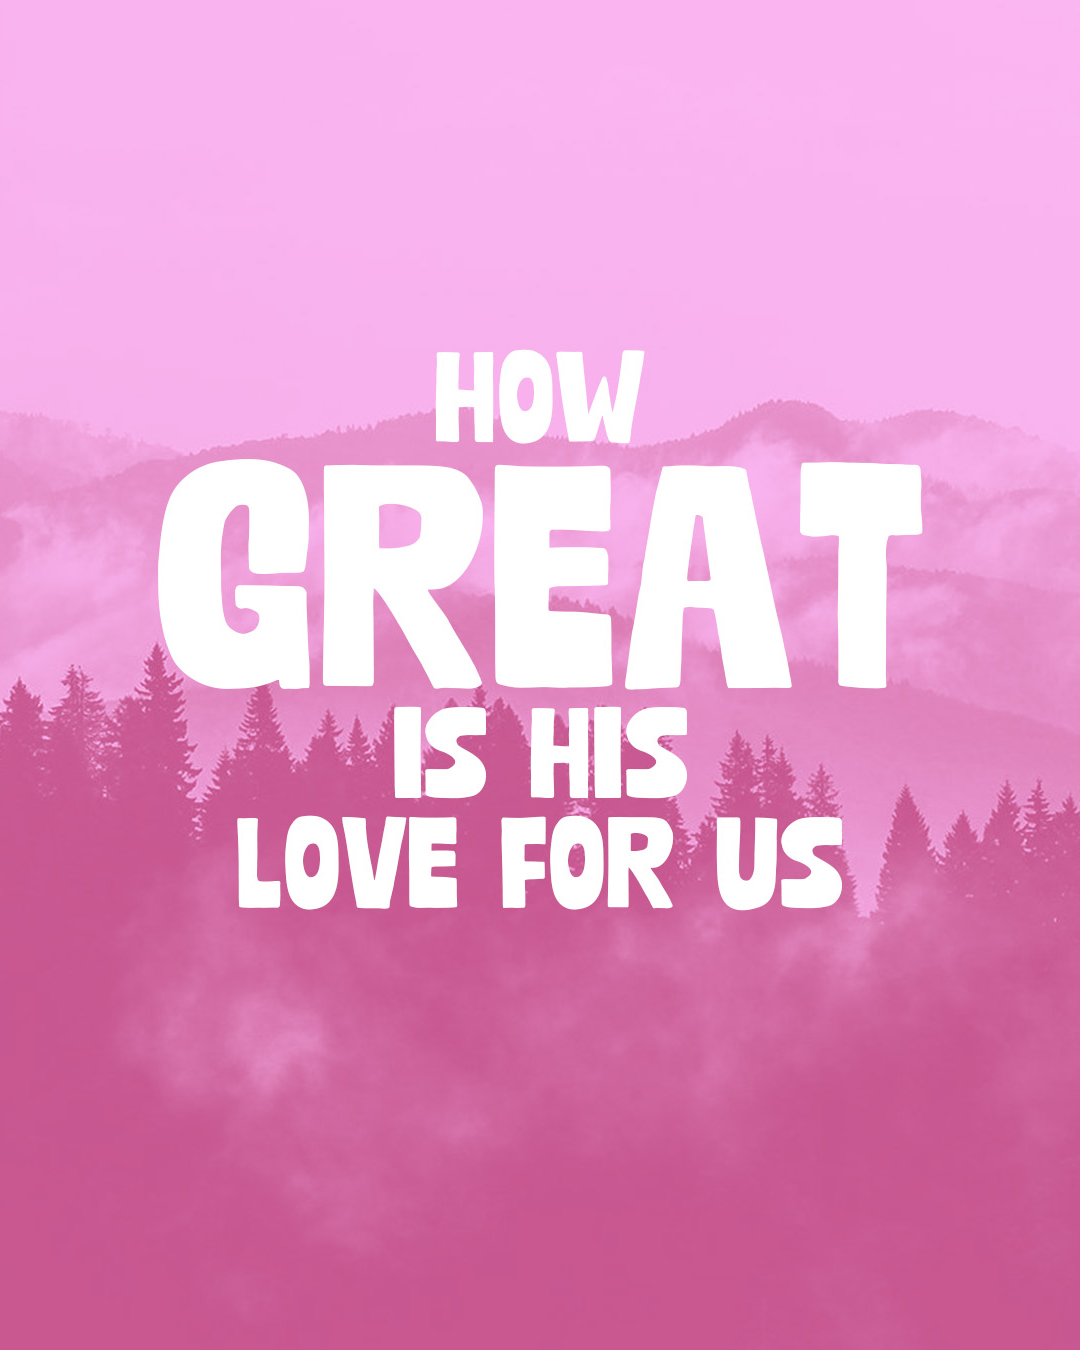 How great is his love for us